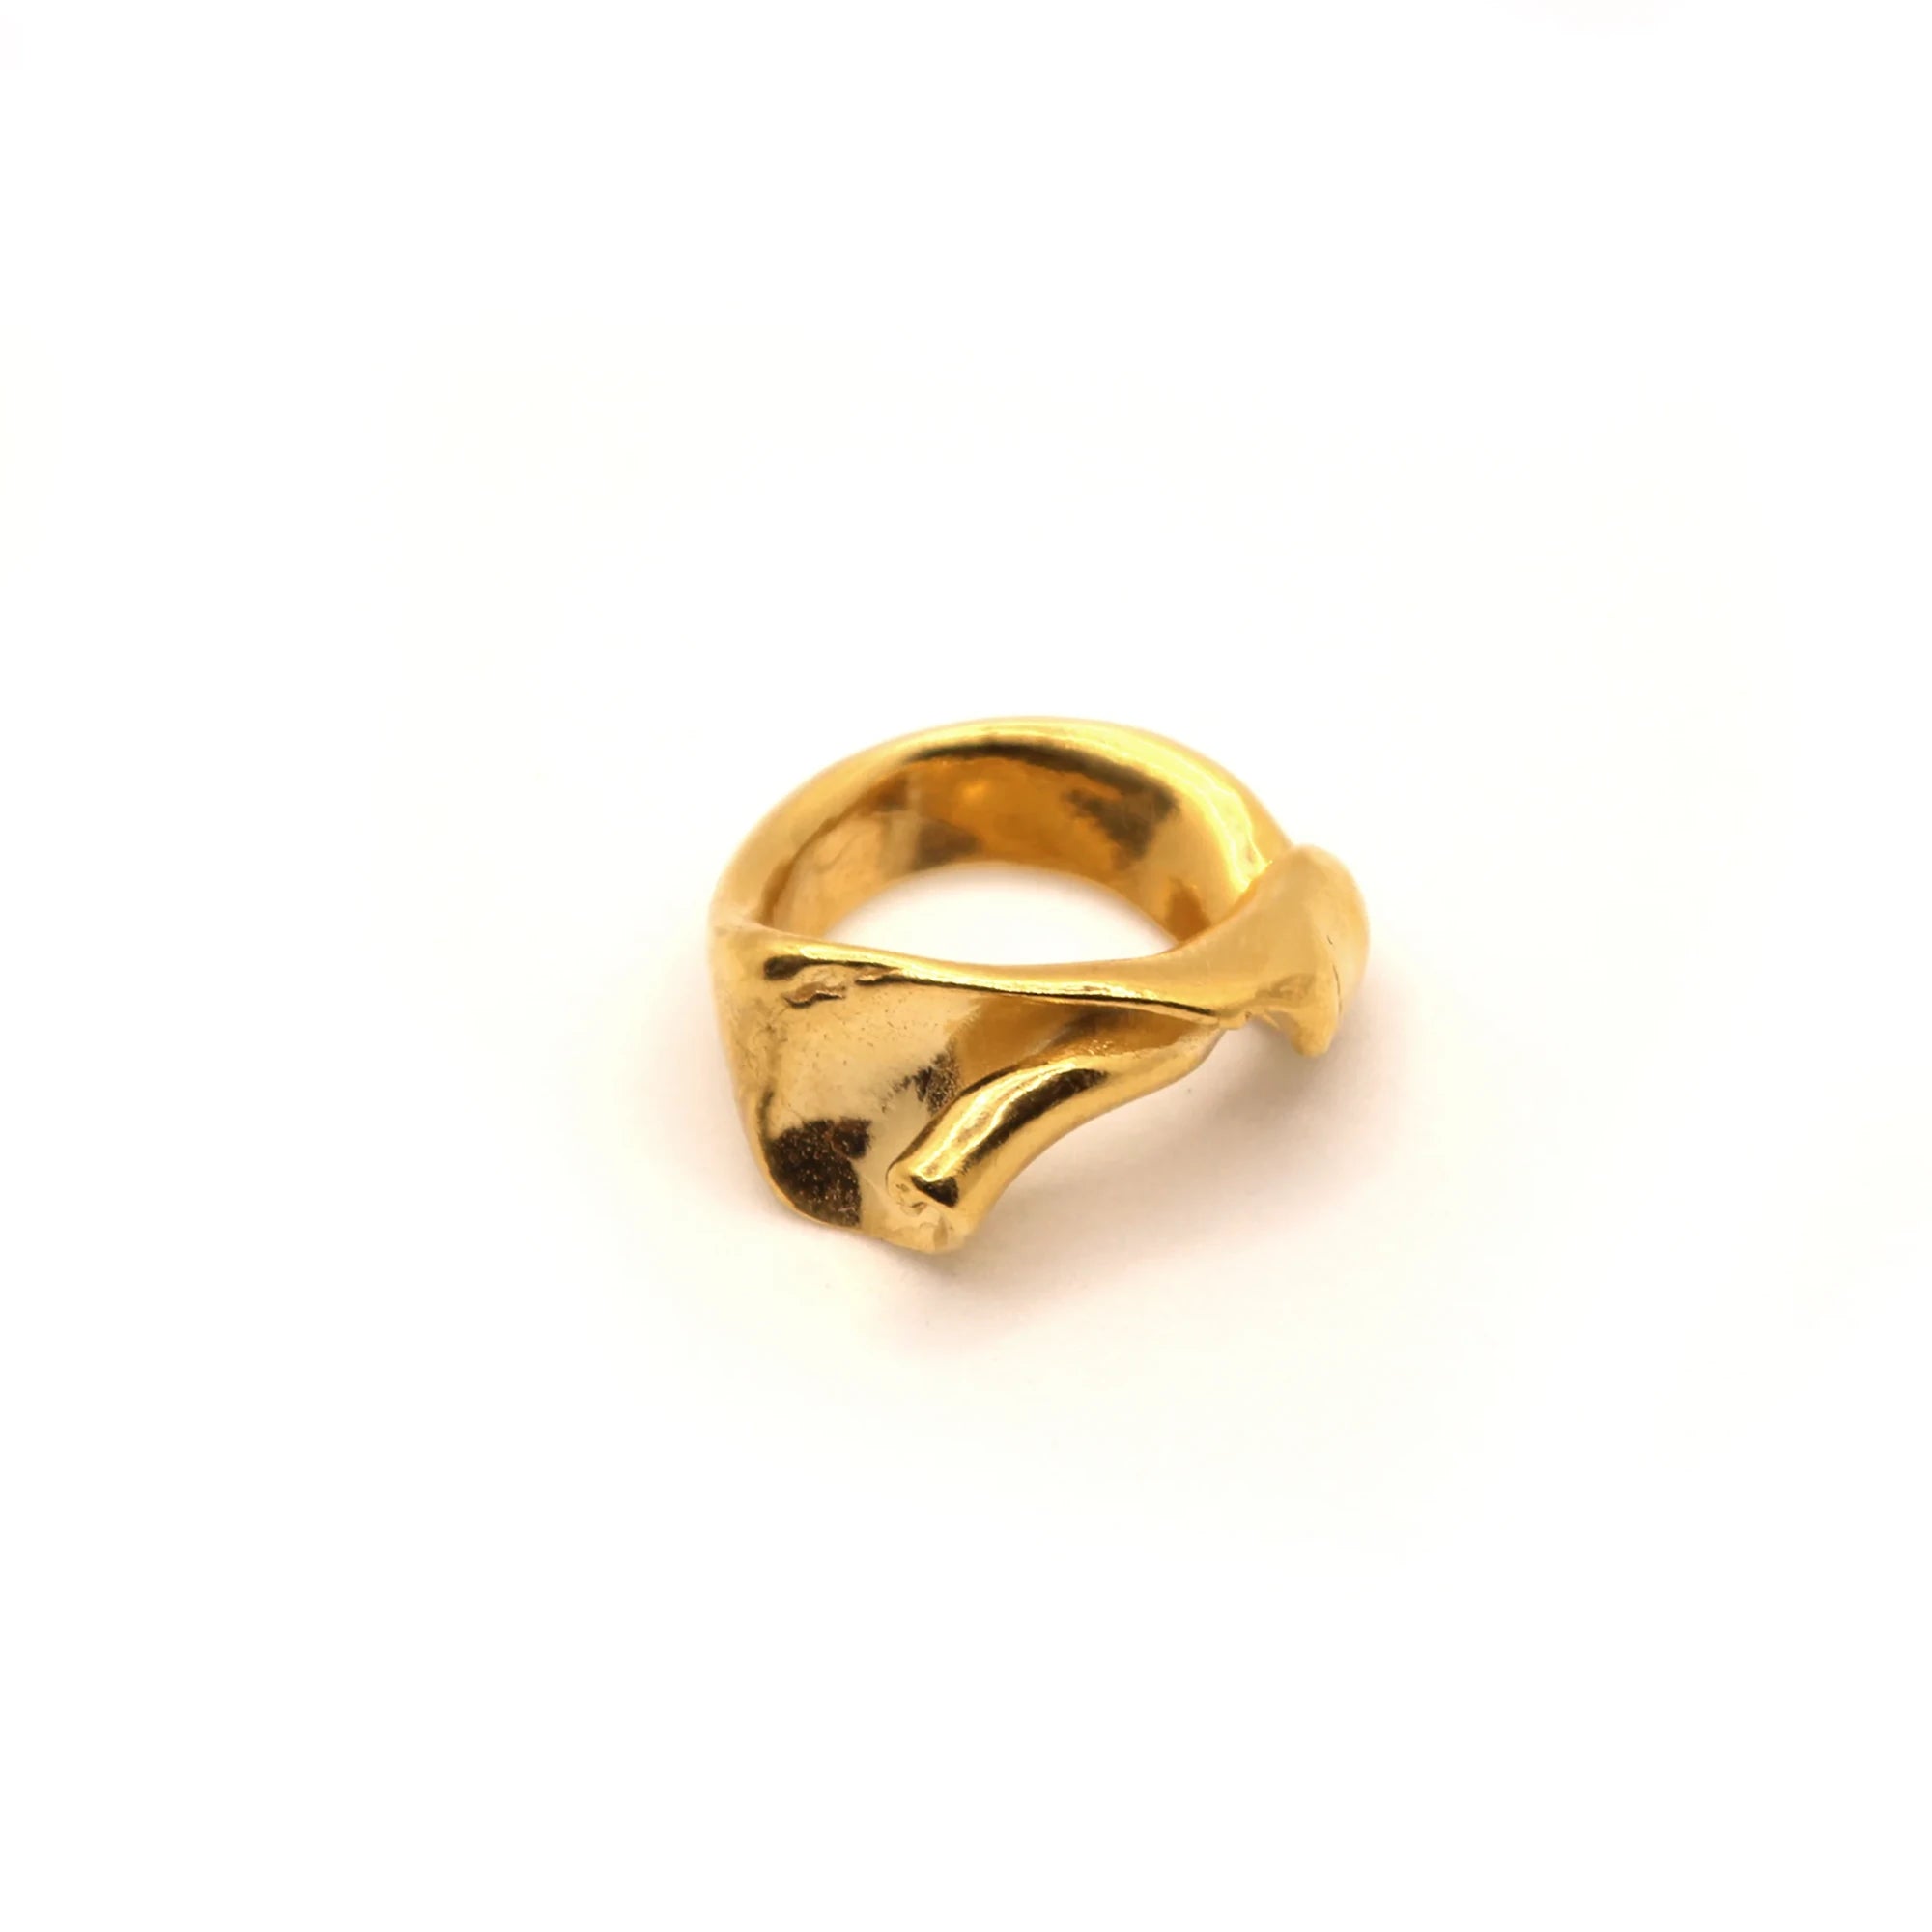 Smooth Fragmented Shell Ring in Gold by Hannah Bourn